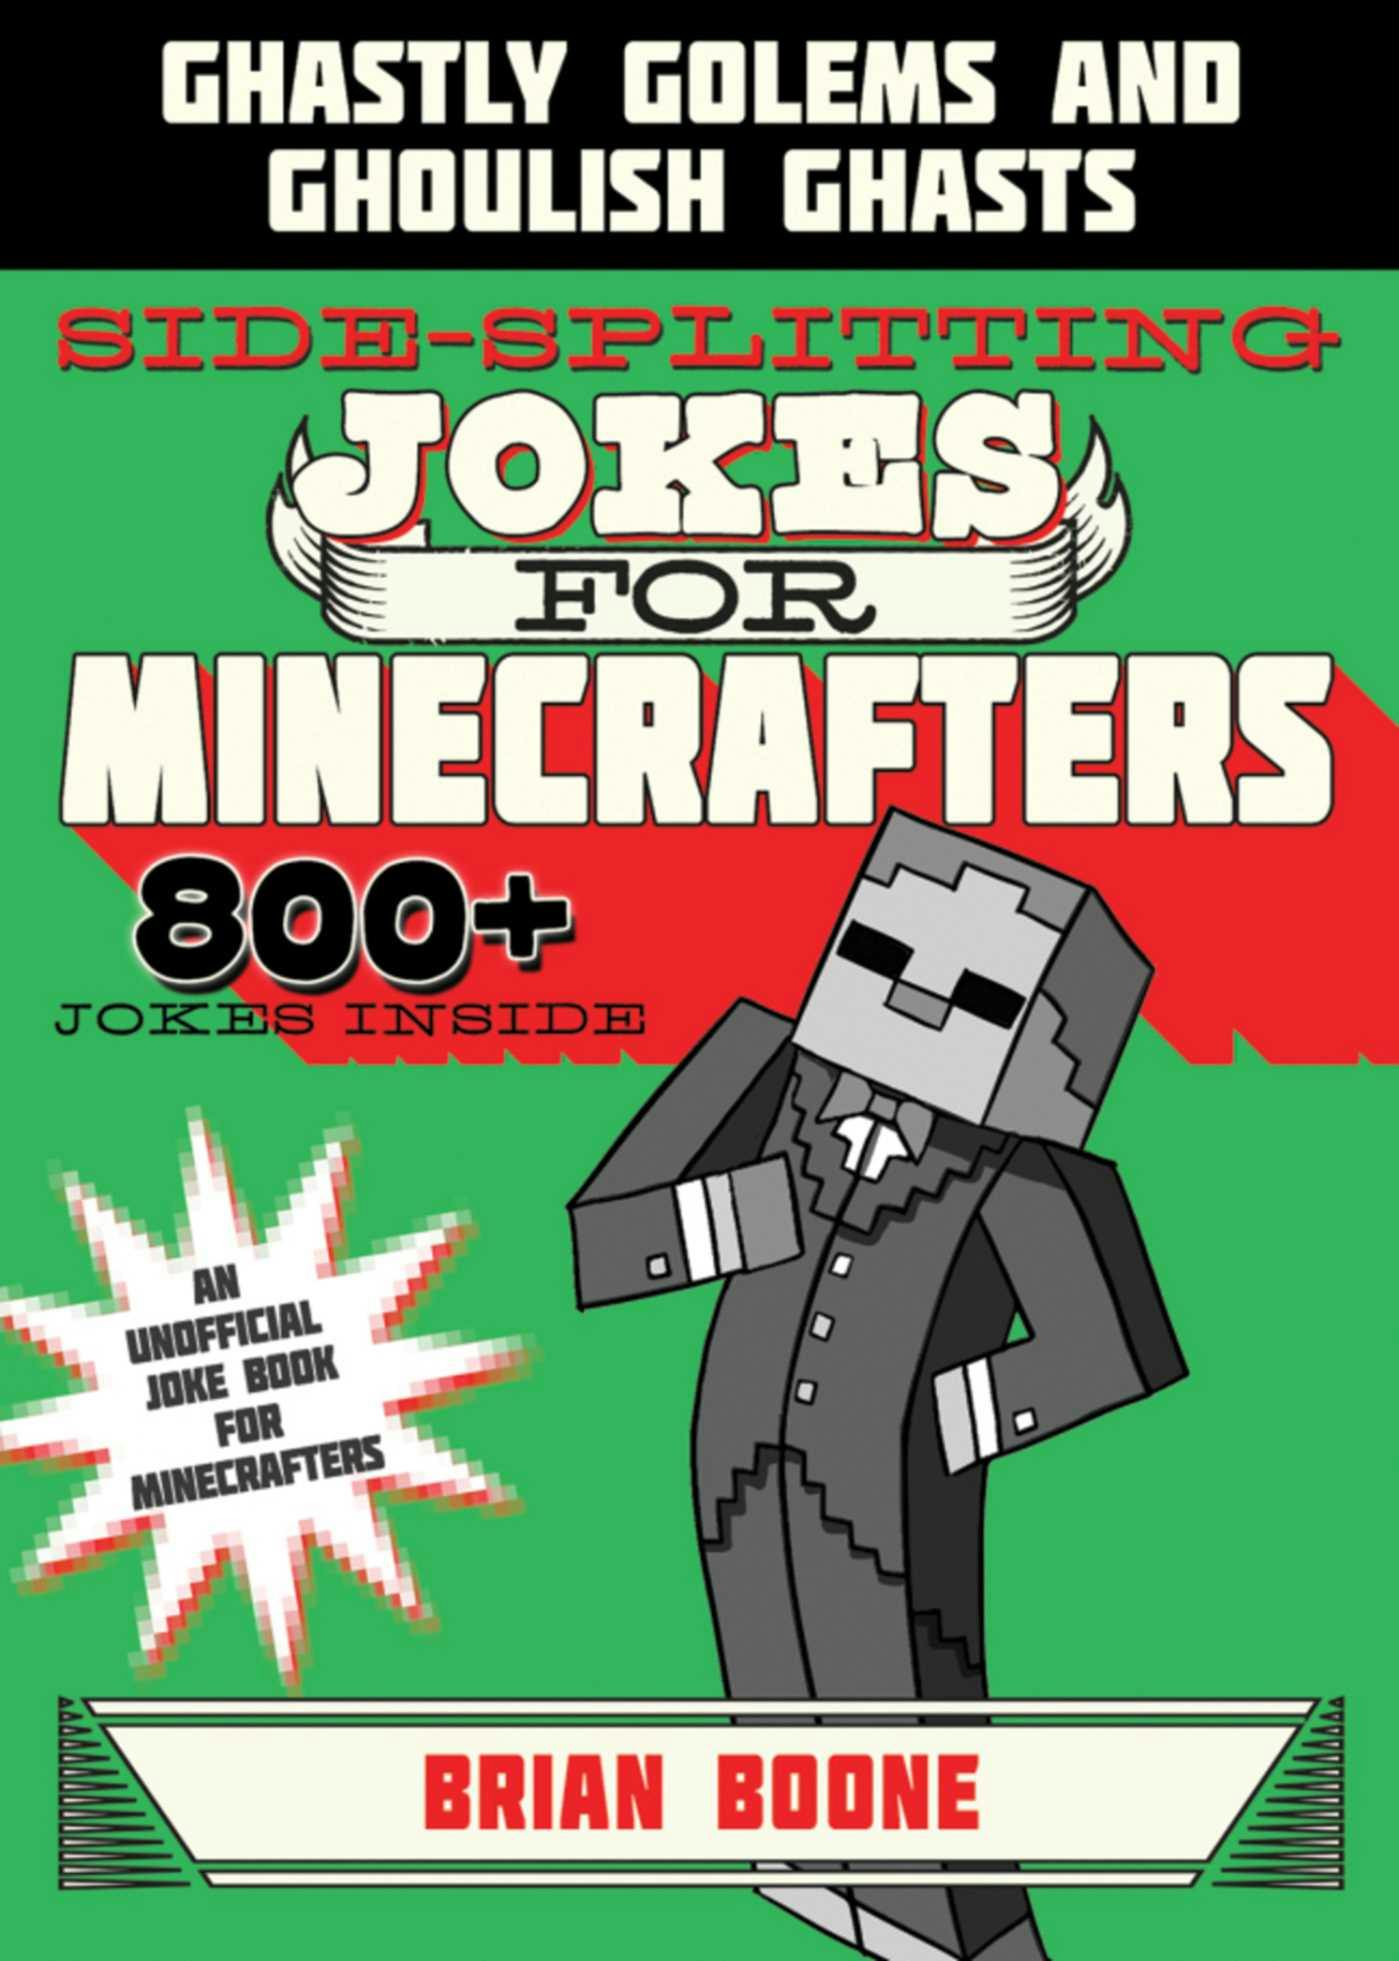 Sidesplitting Jokes for Minecrafters: Ghastly Golems and Ghoulish Ghasts - Brian Boone